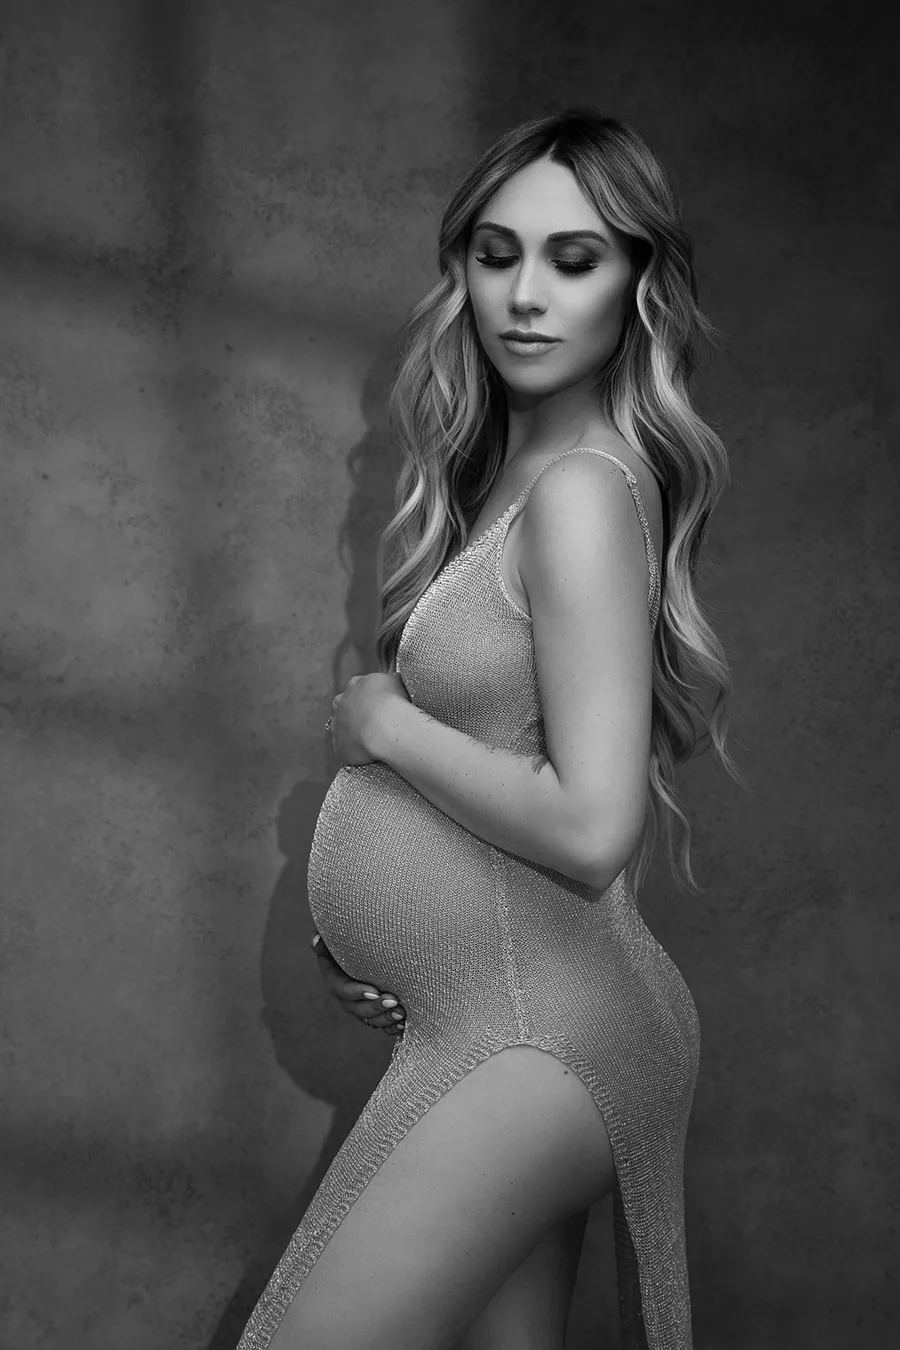 maternity portrait of a pregnant woman standing by a wall with a window light pattern behind her while wearing a sheer dress taken by Andrea Liora Studios in San Francisco CA